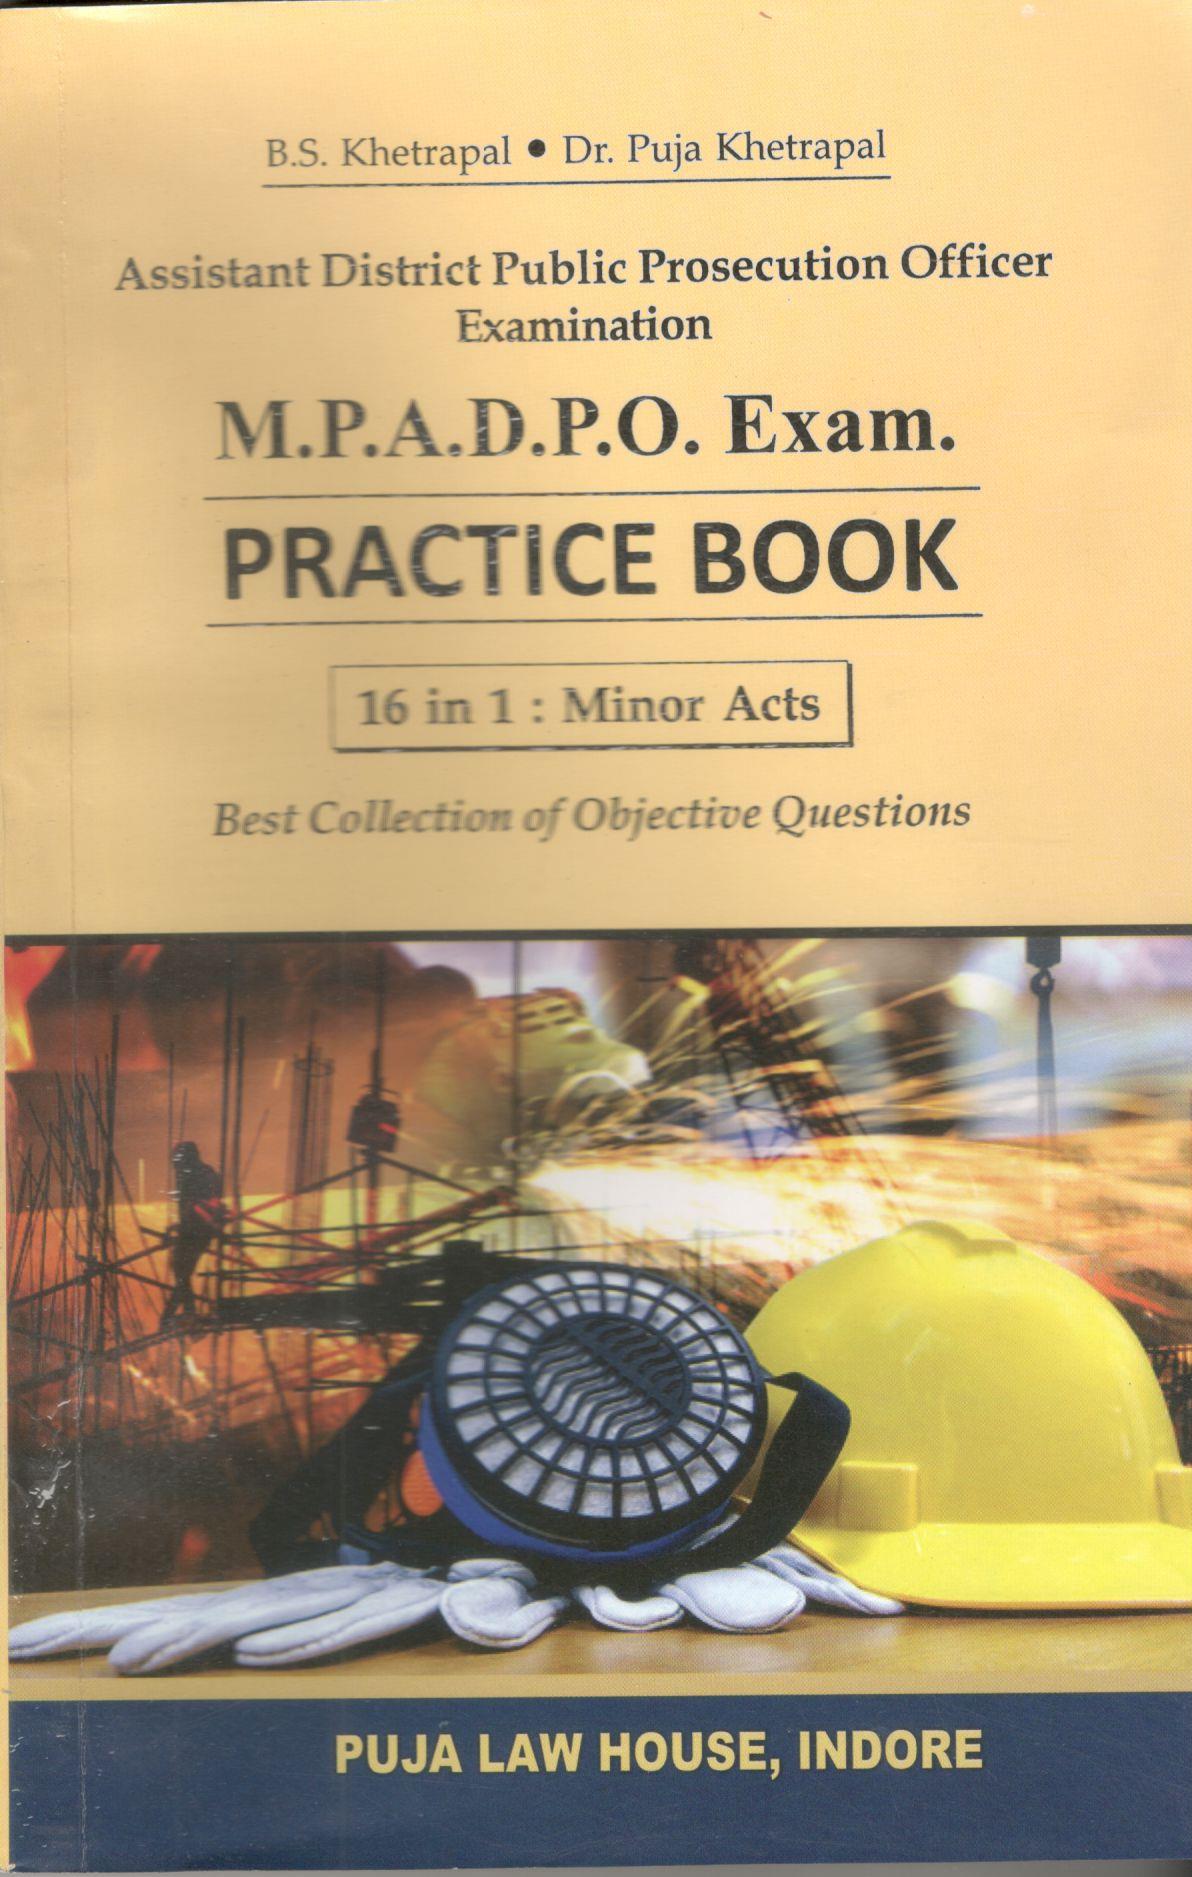  Buy M.P.A.D.P.O. Exam. Practice Book [16 in 1: Minor Acts]